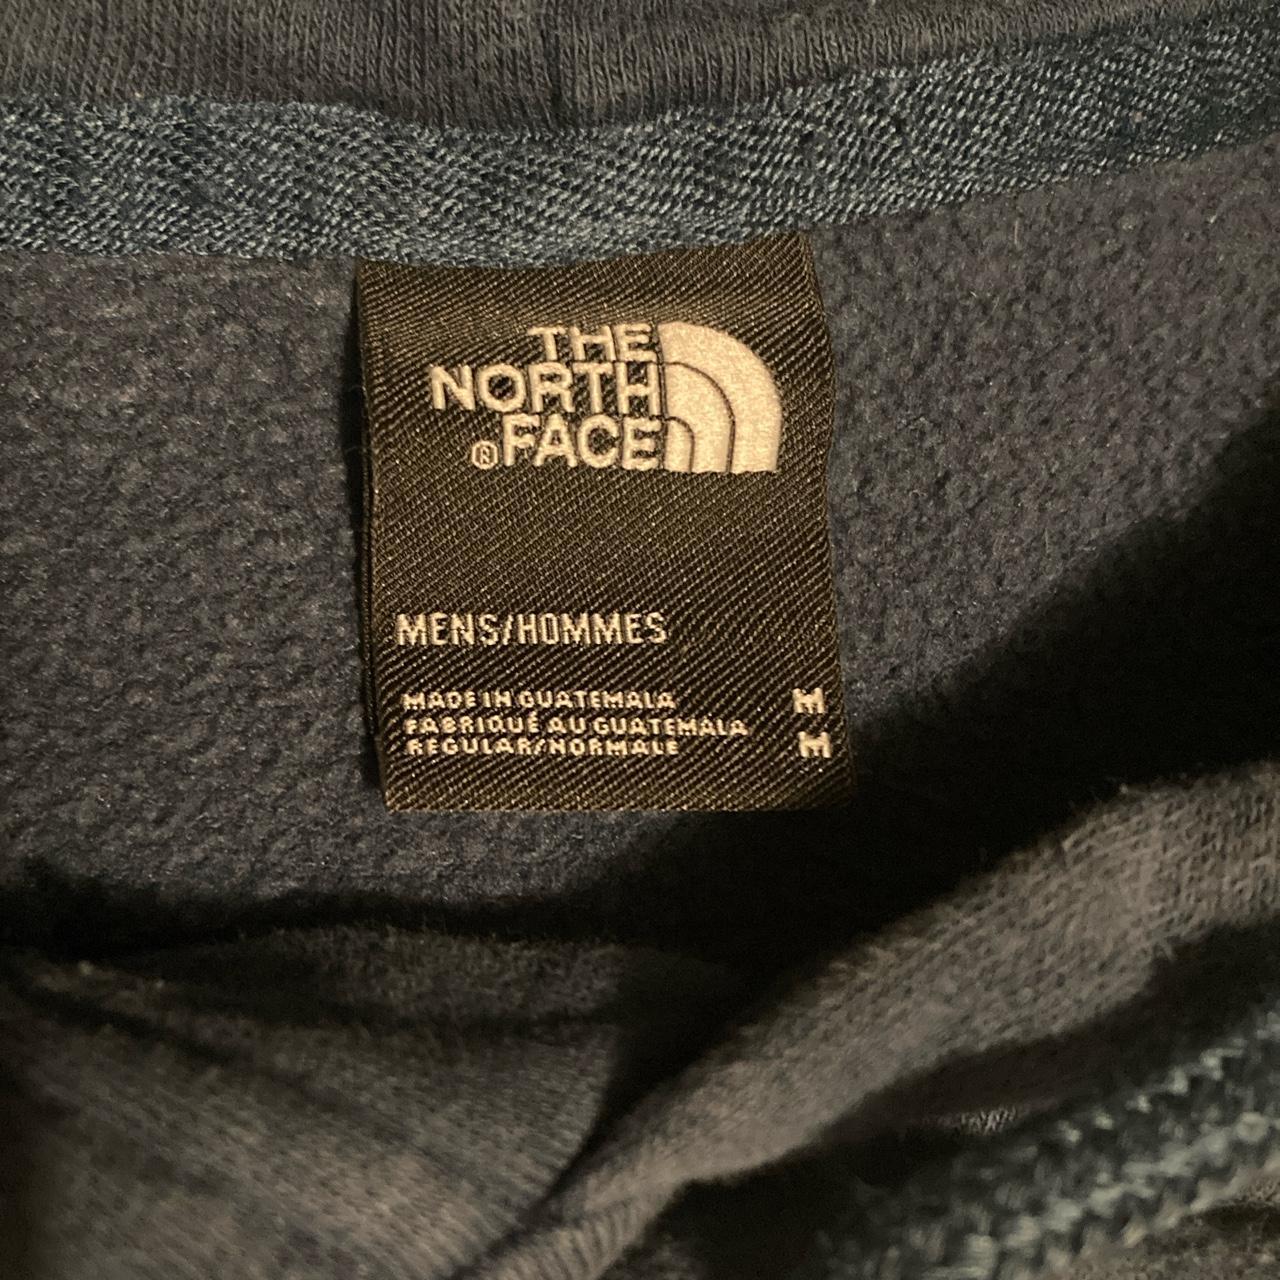 Medium size the north face blue hoodie Perfect... - Depop